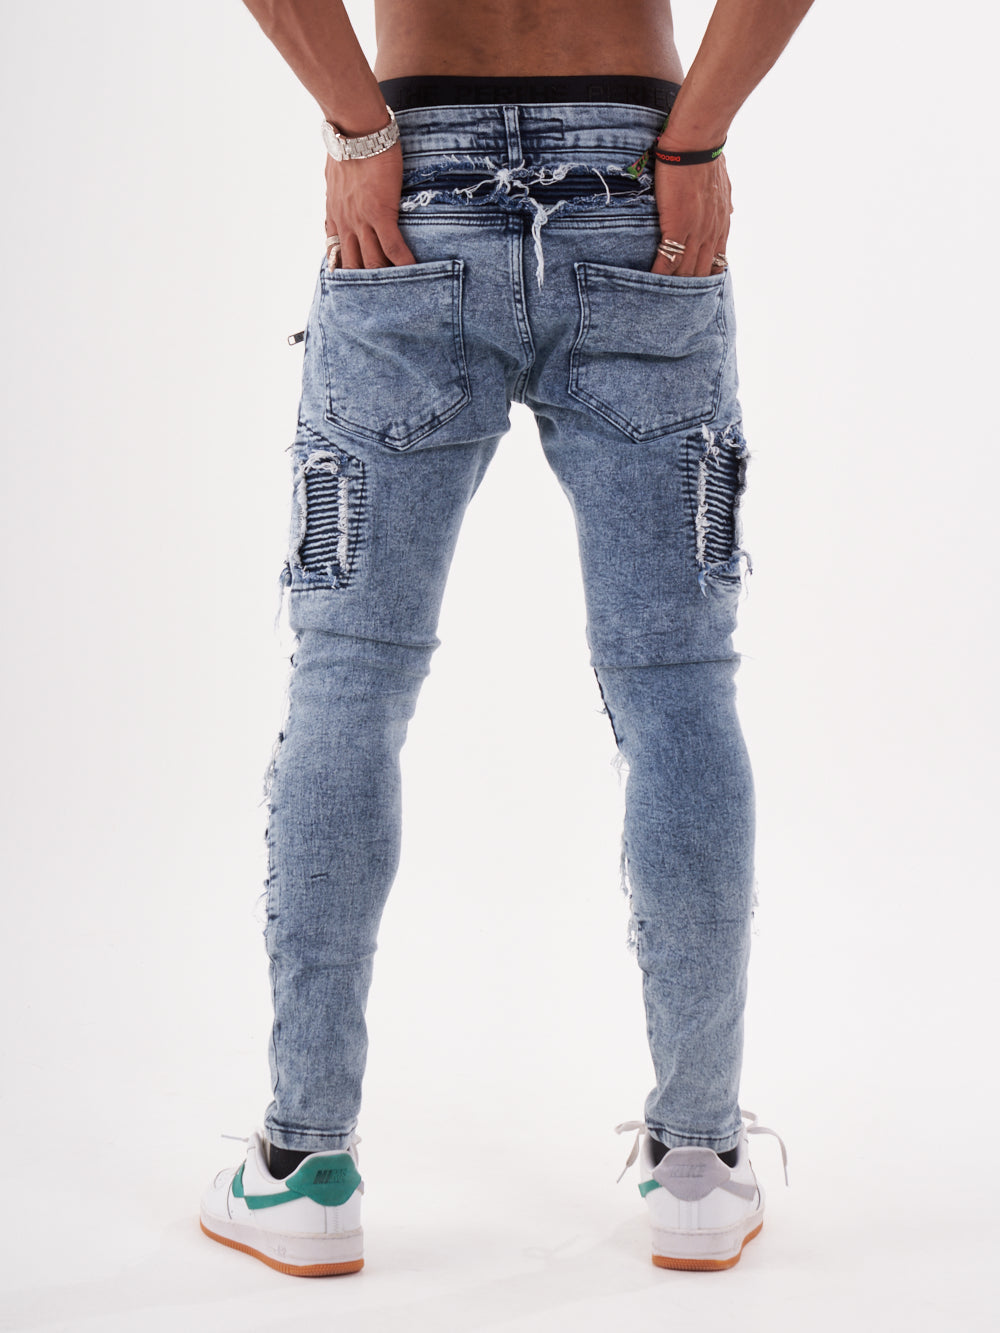 The back view of a man wearing RADICAL denim jeans.